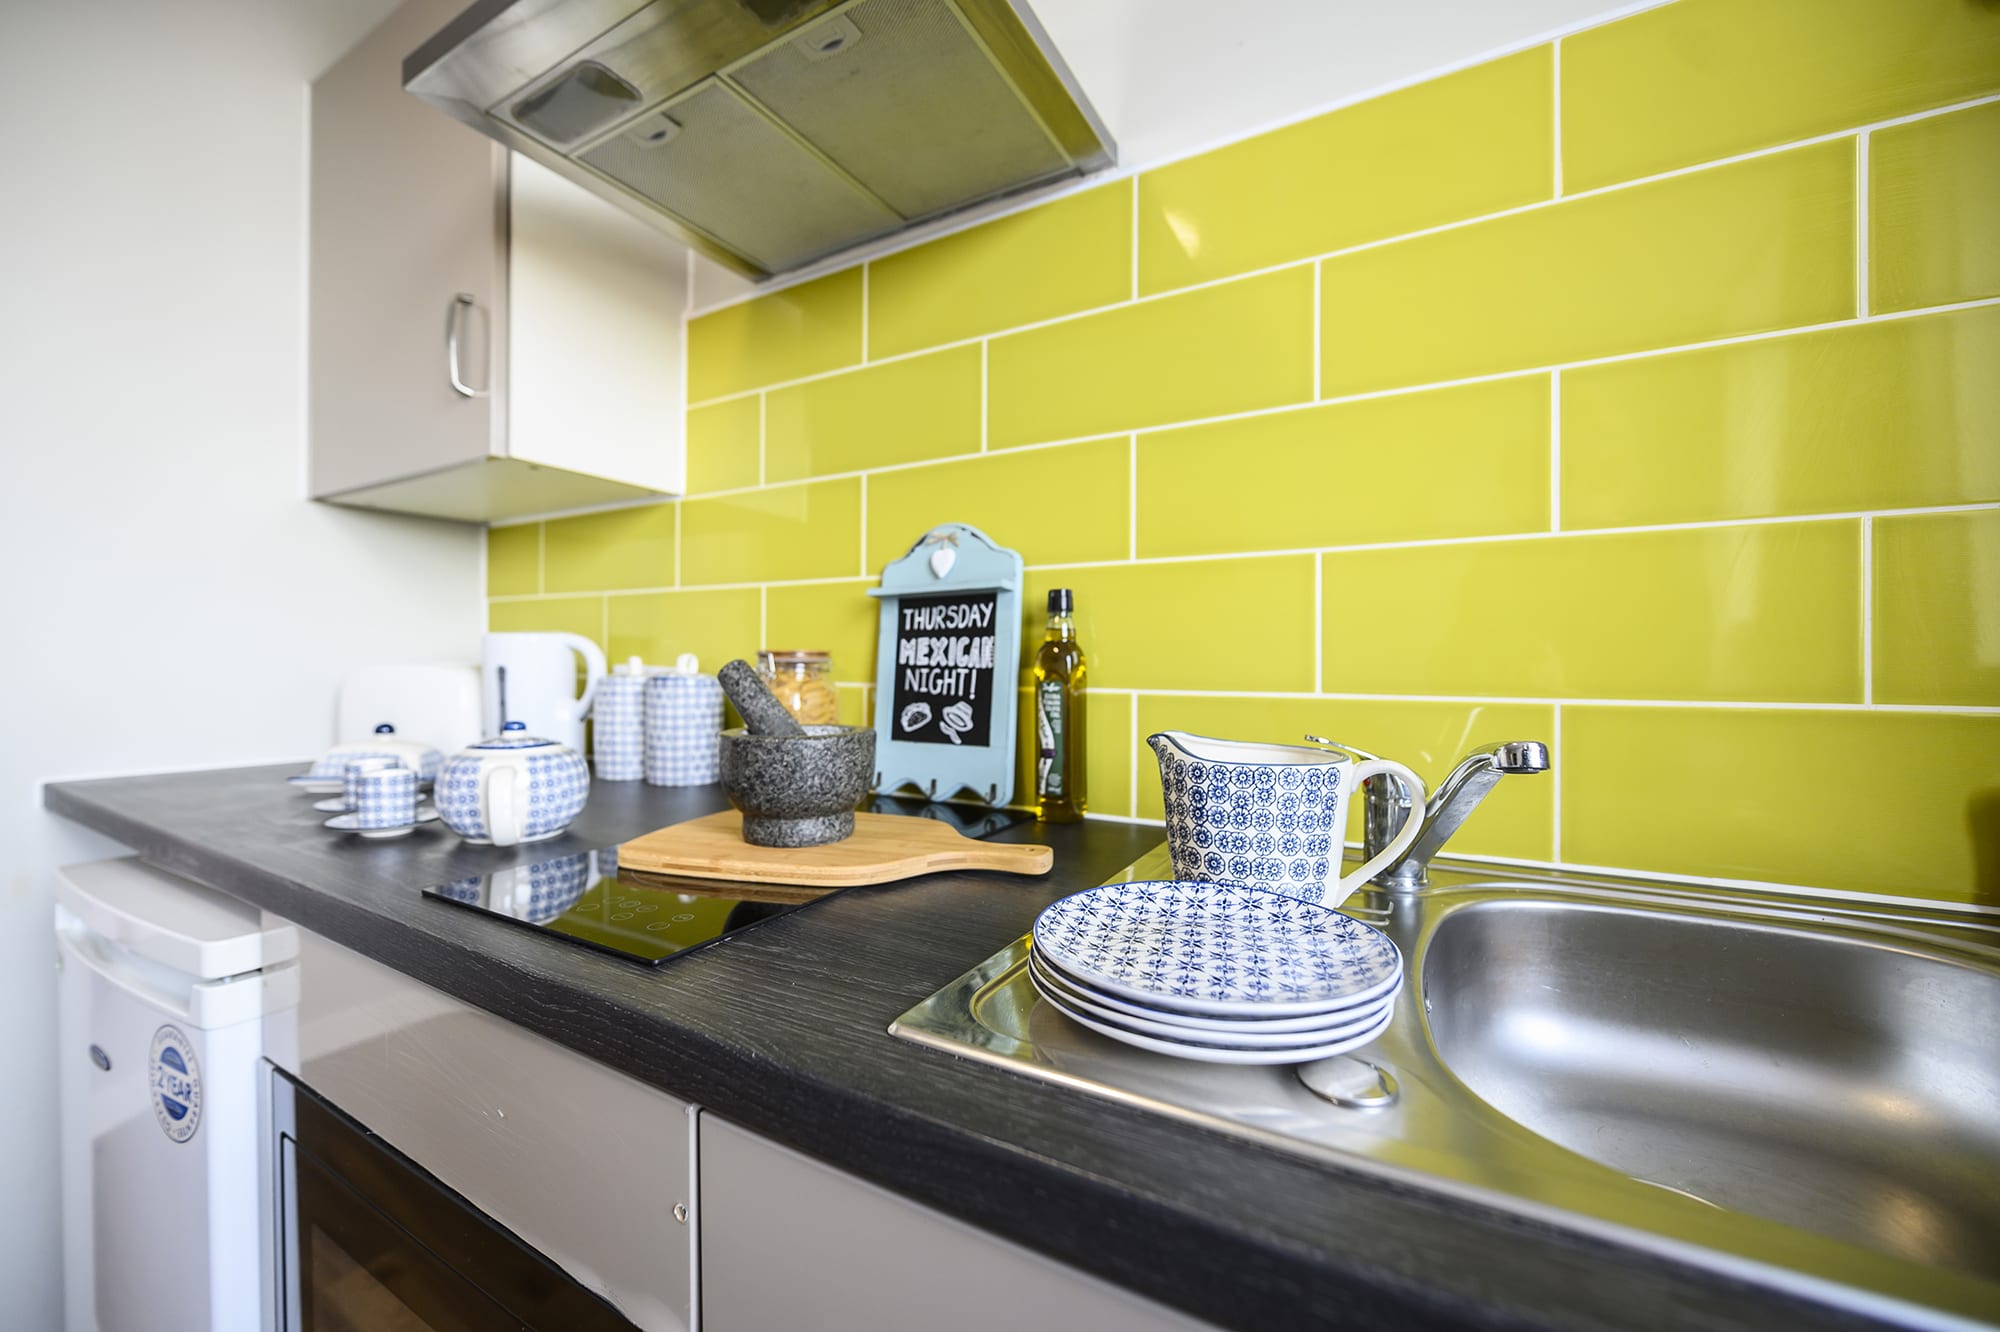 student accommodation in sheffield